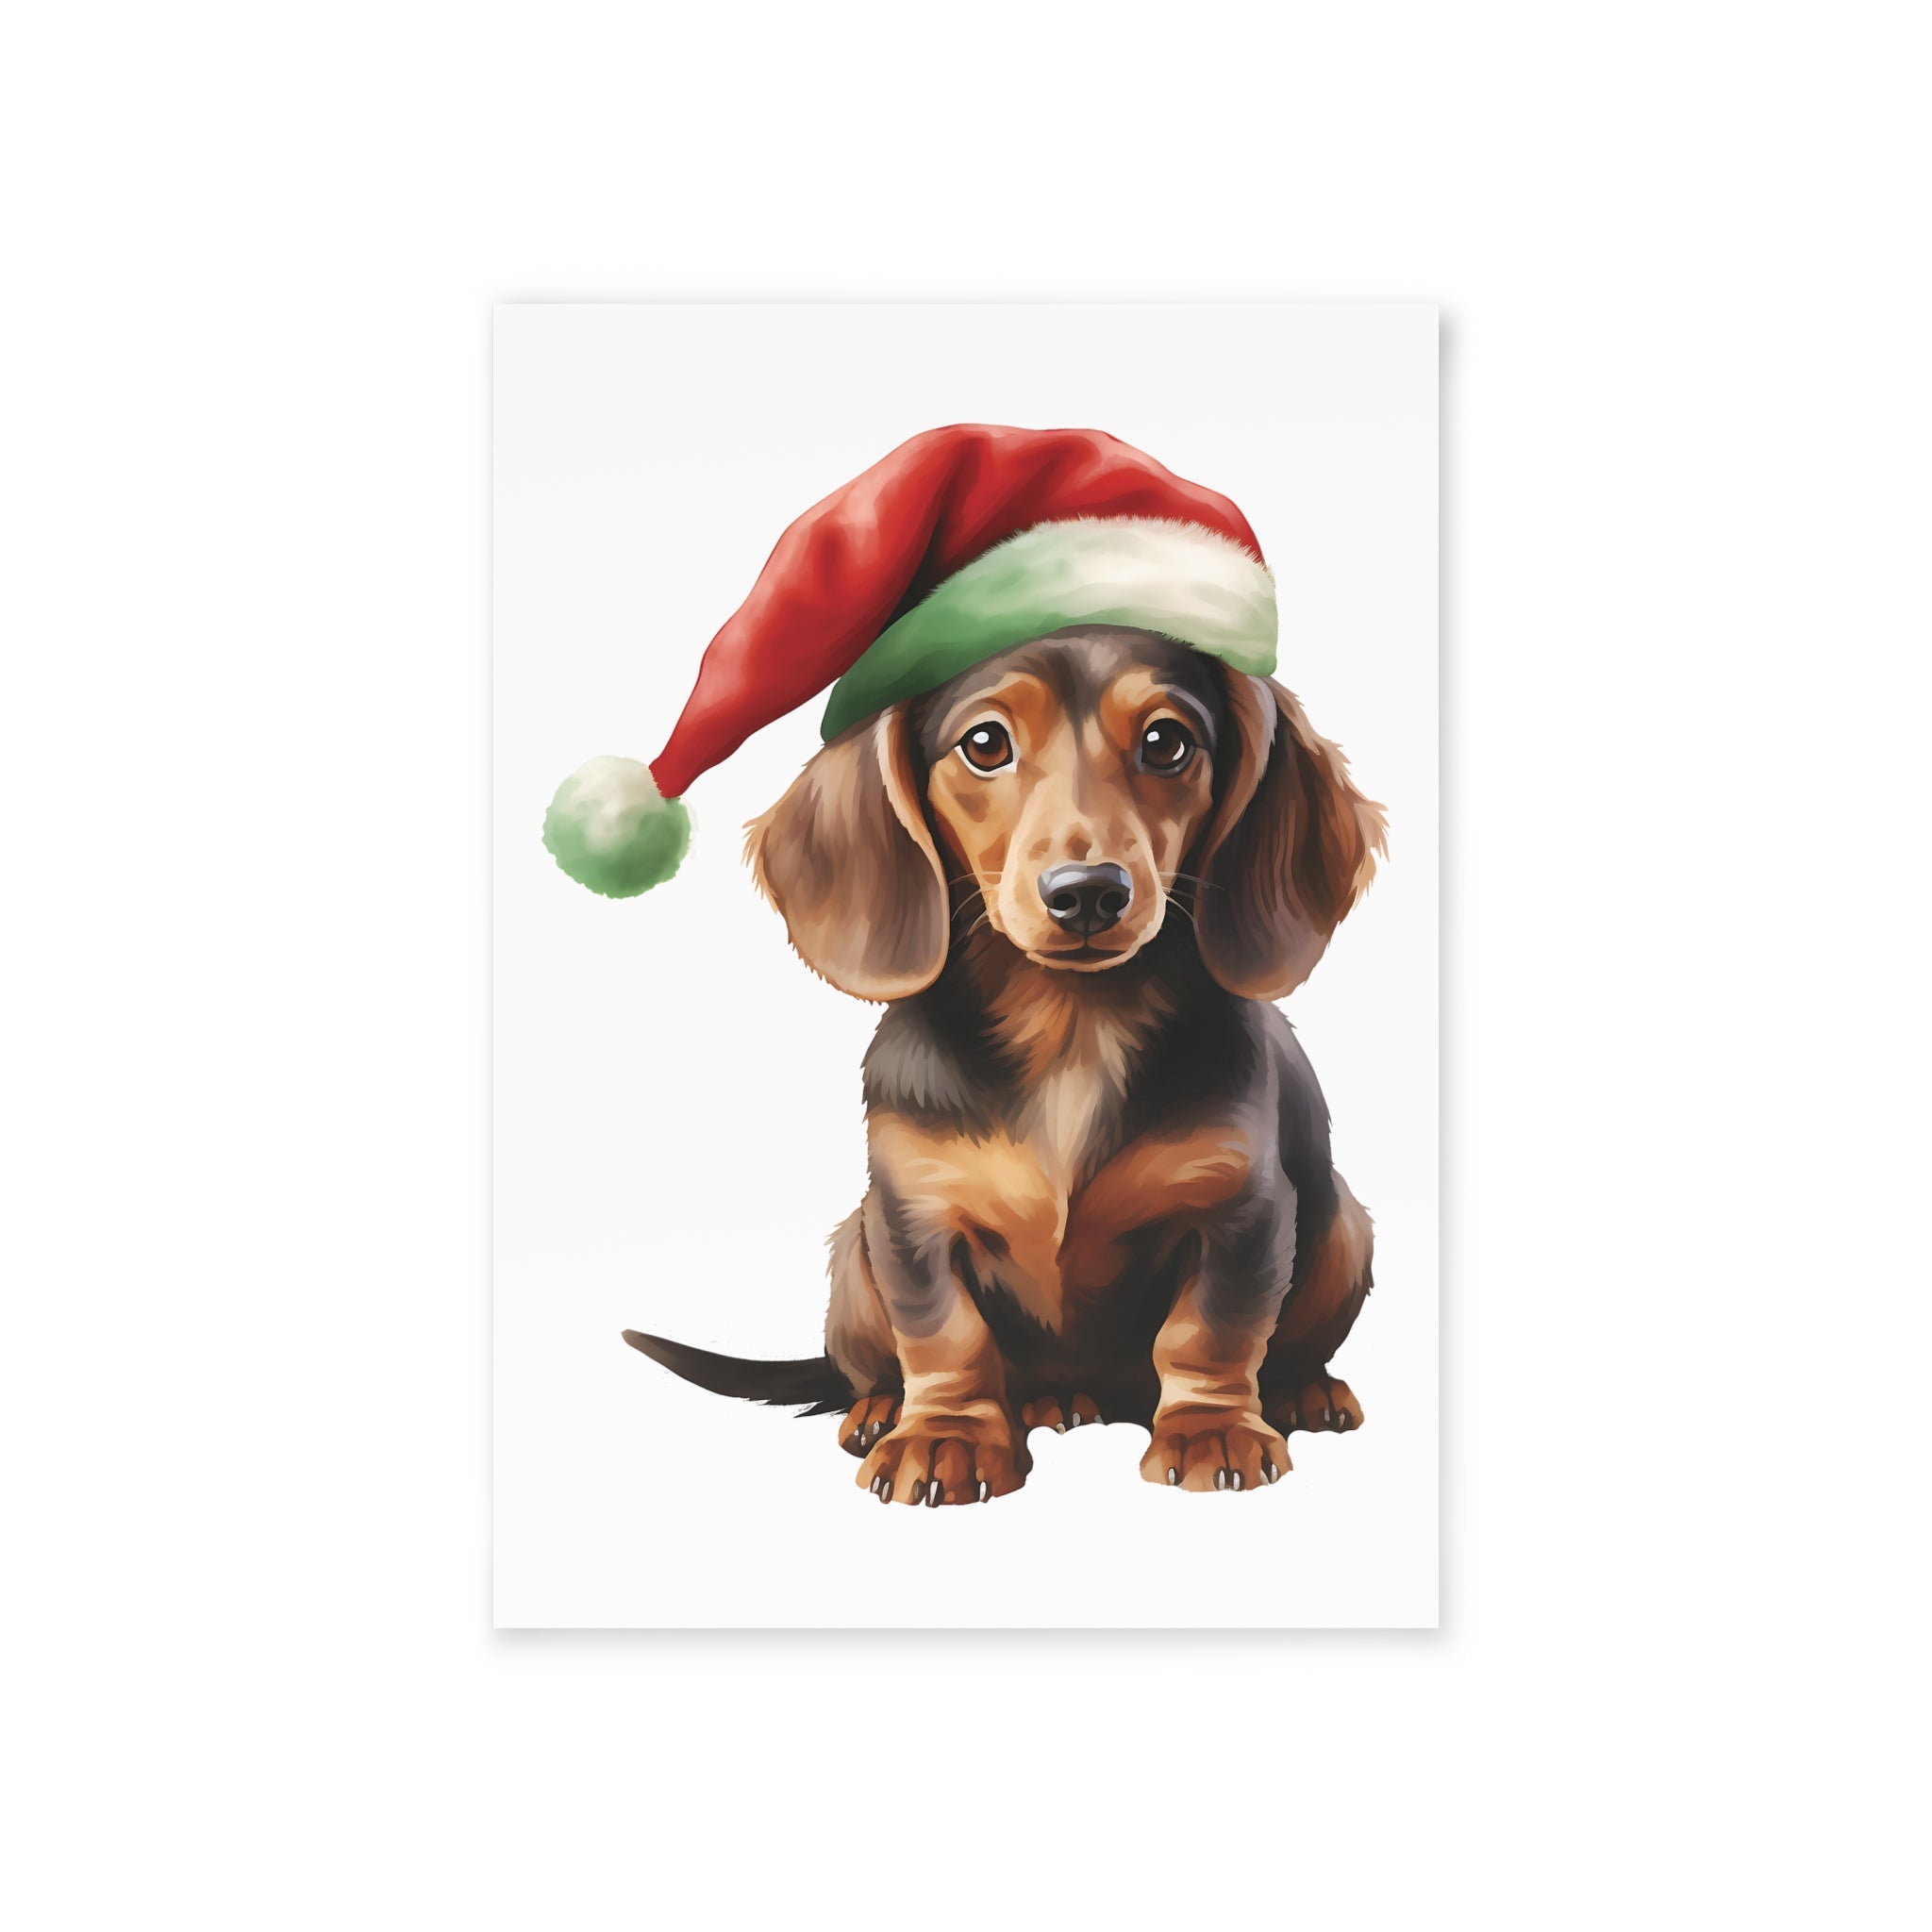 Dachshund, Christmas Dog - One-Sided Greeting Card/Art Print with Envelope, 300gsm FSC-Certified